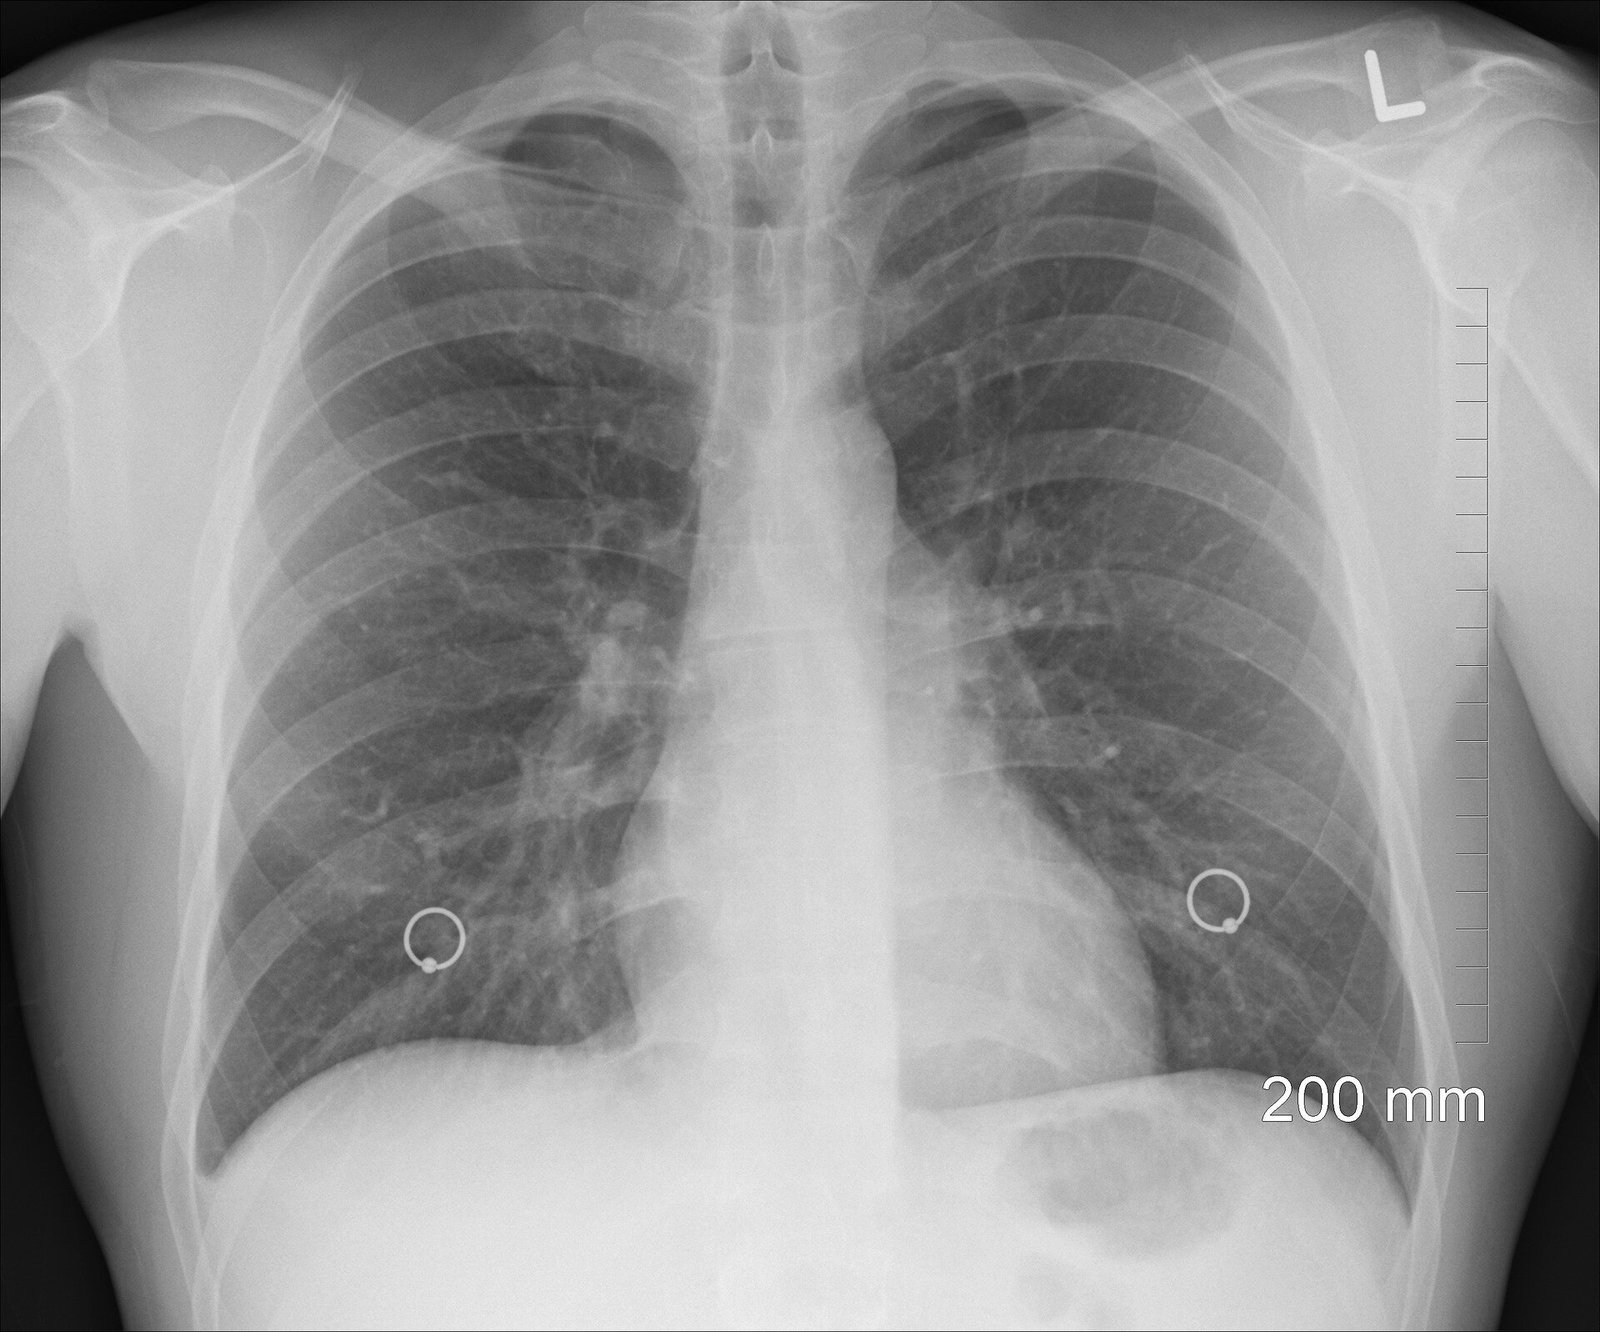 Severe lung infection during COVID 19 can cause damage to the heart